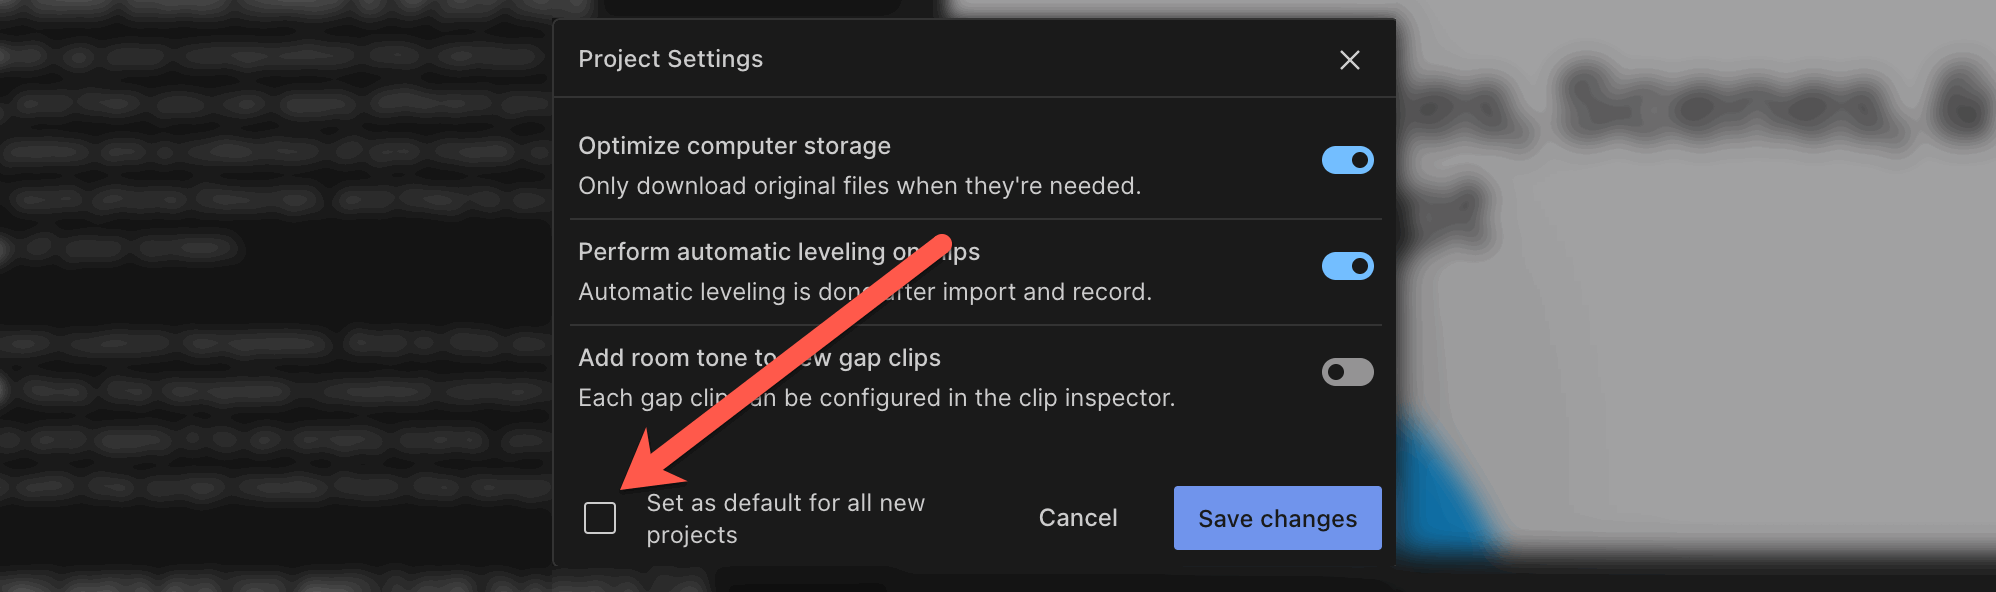 Apply_project_settings_to_app_preferences_V52.gif